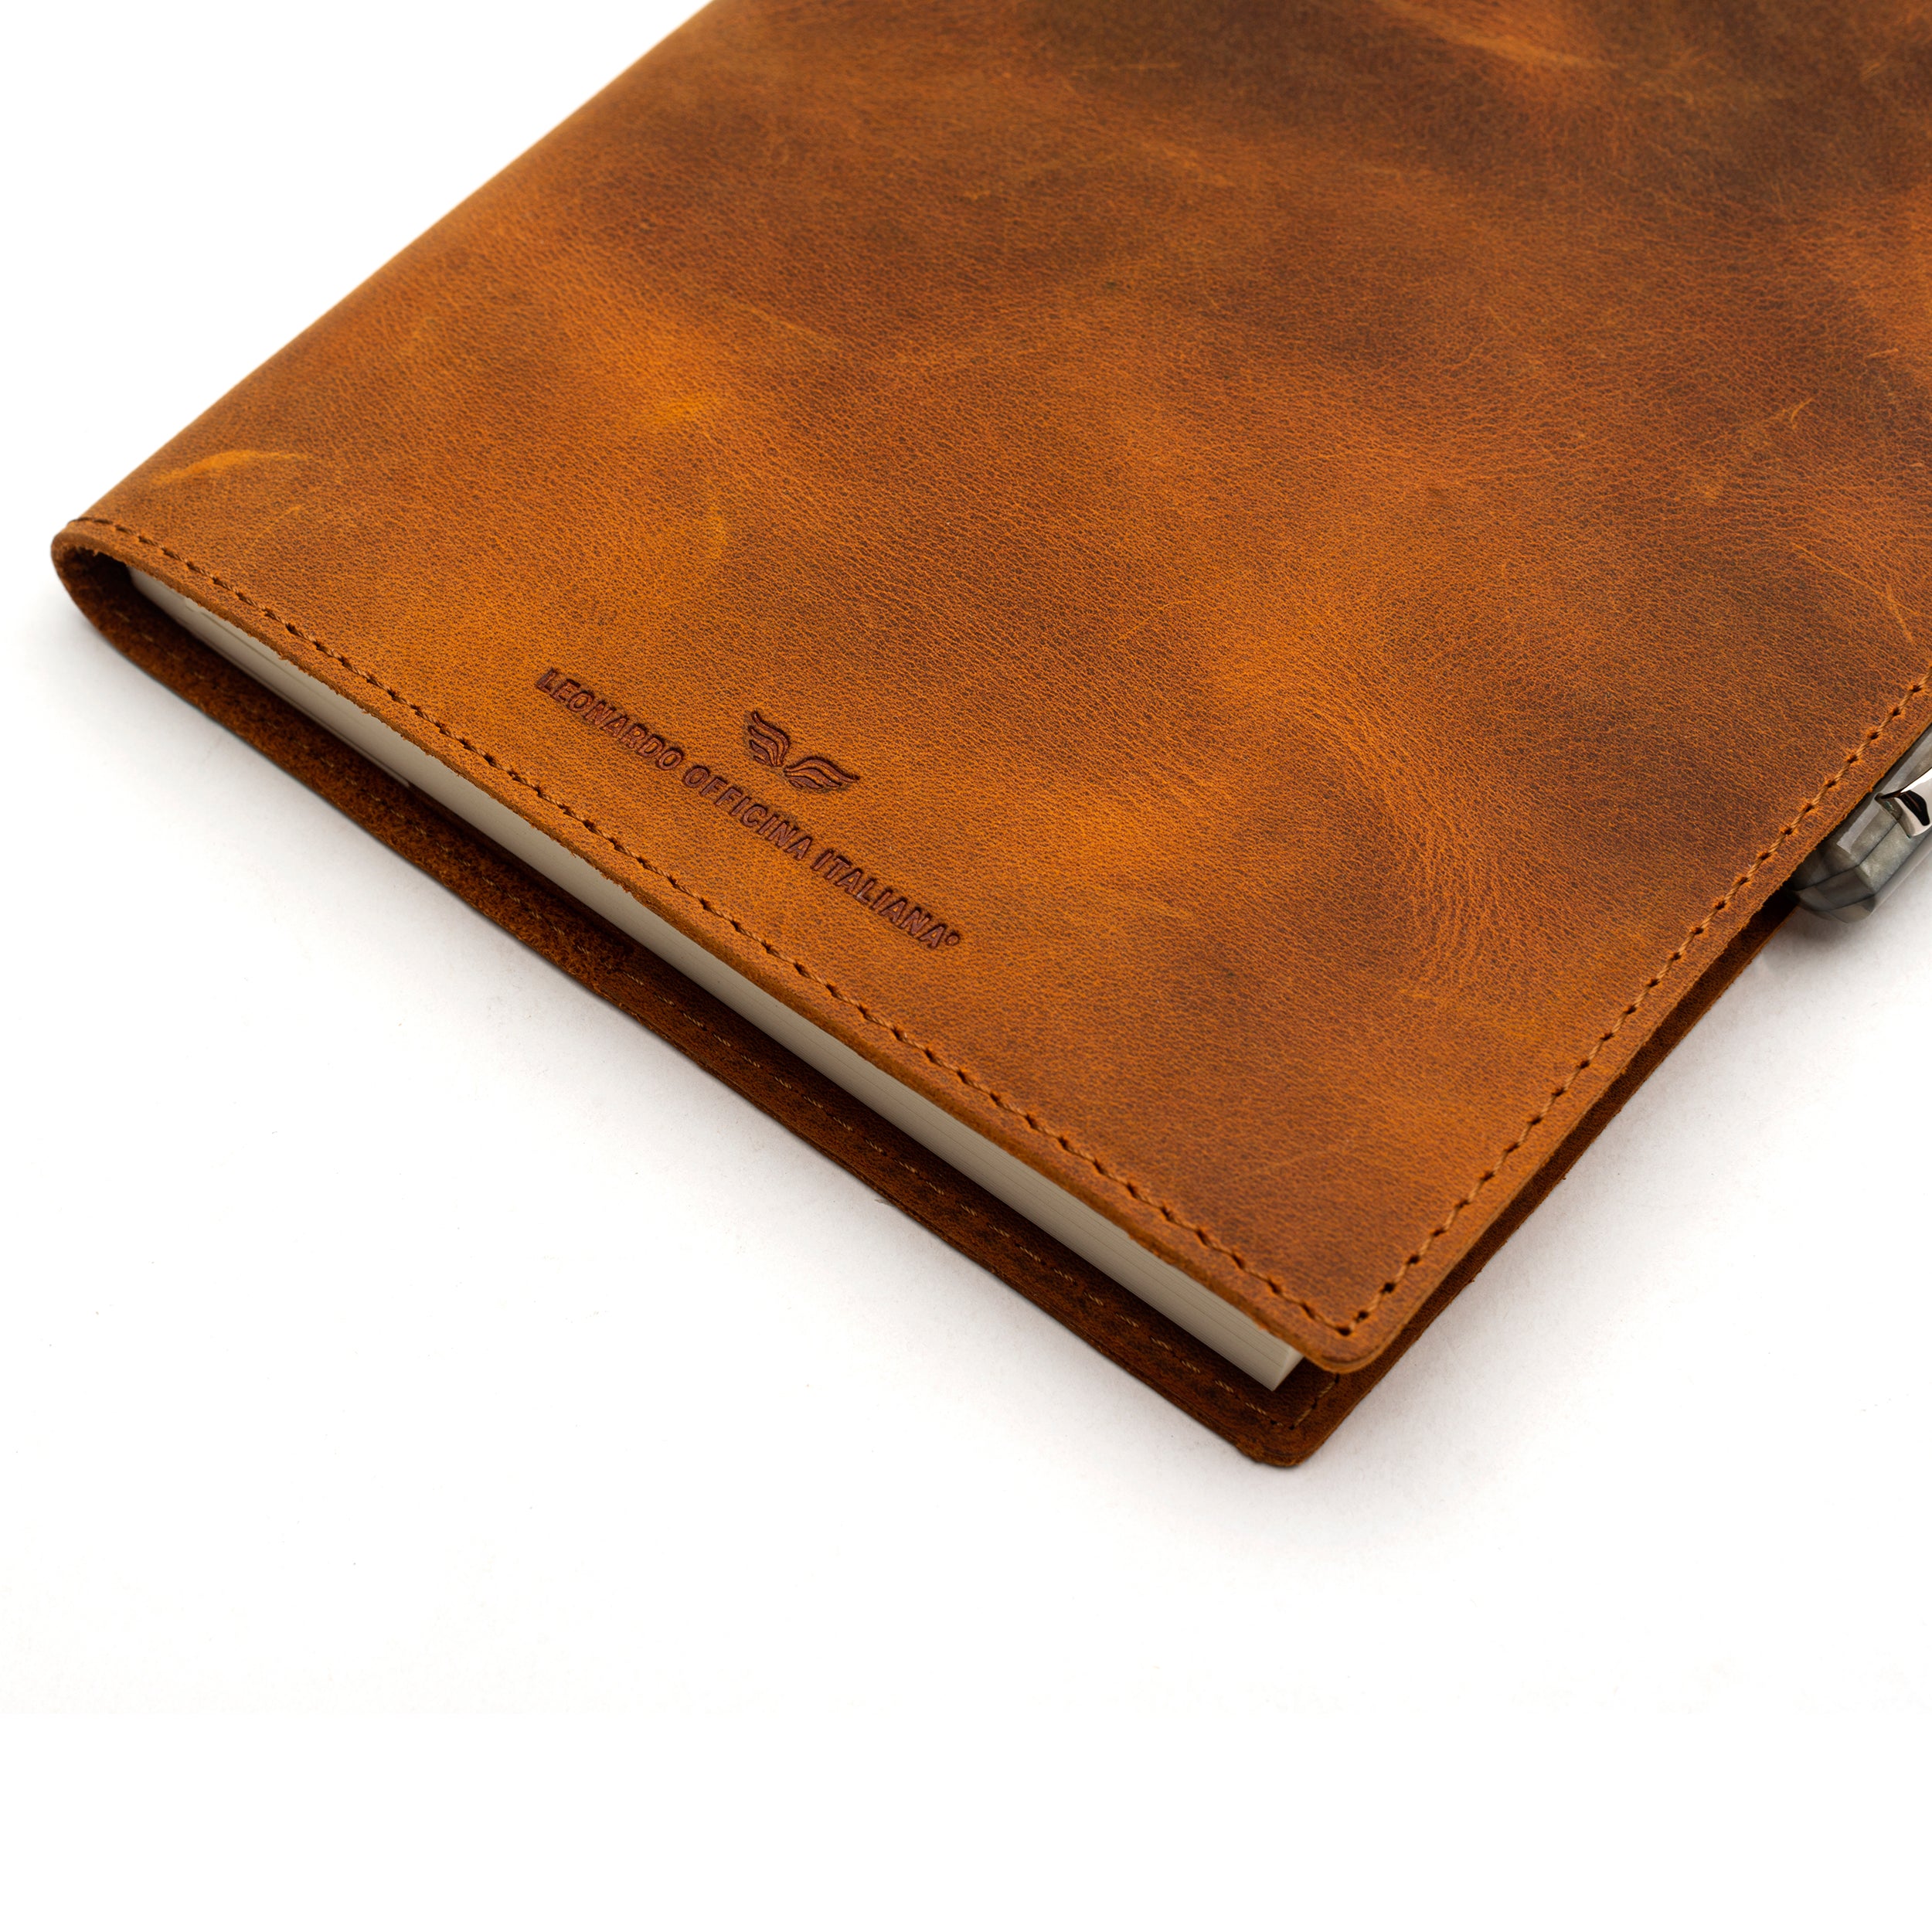 Leather Slim A5 Notebook / Planner Cover - Crazy Horse Tan